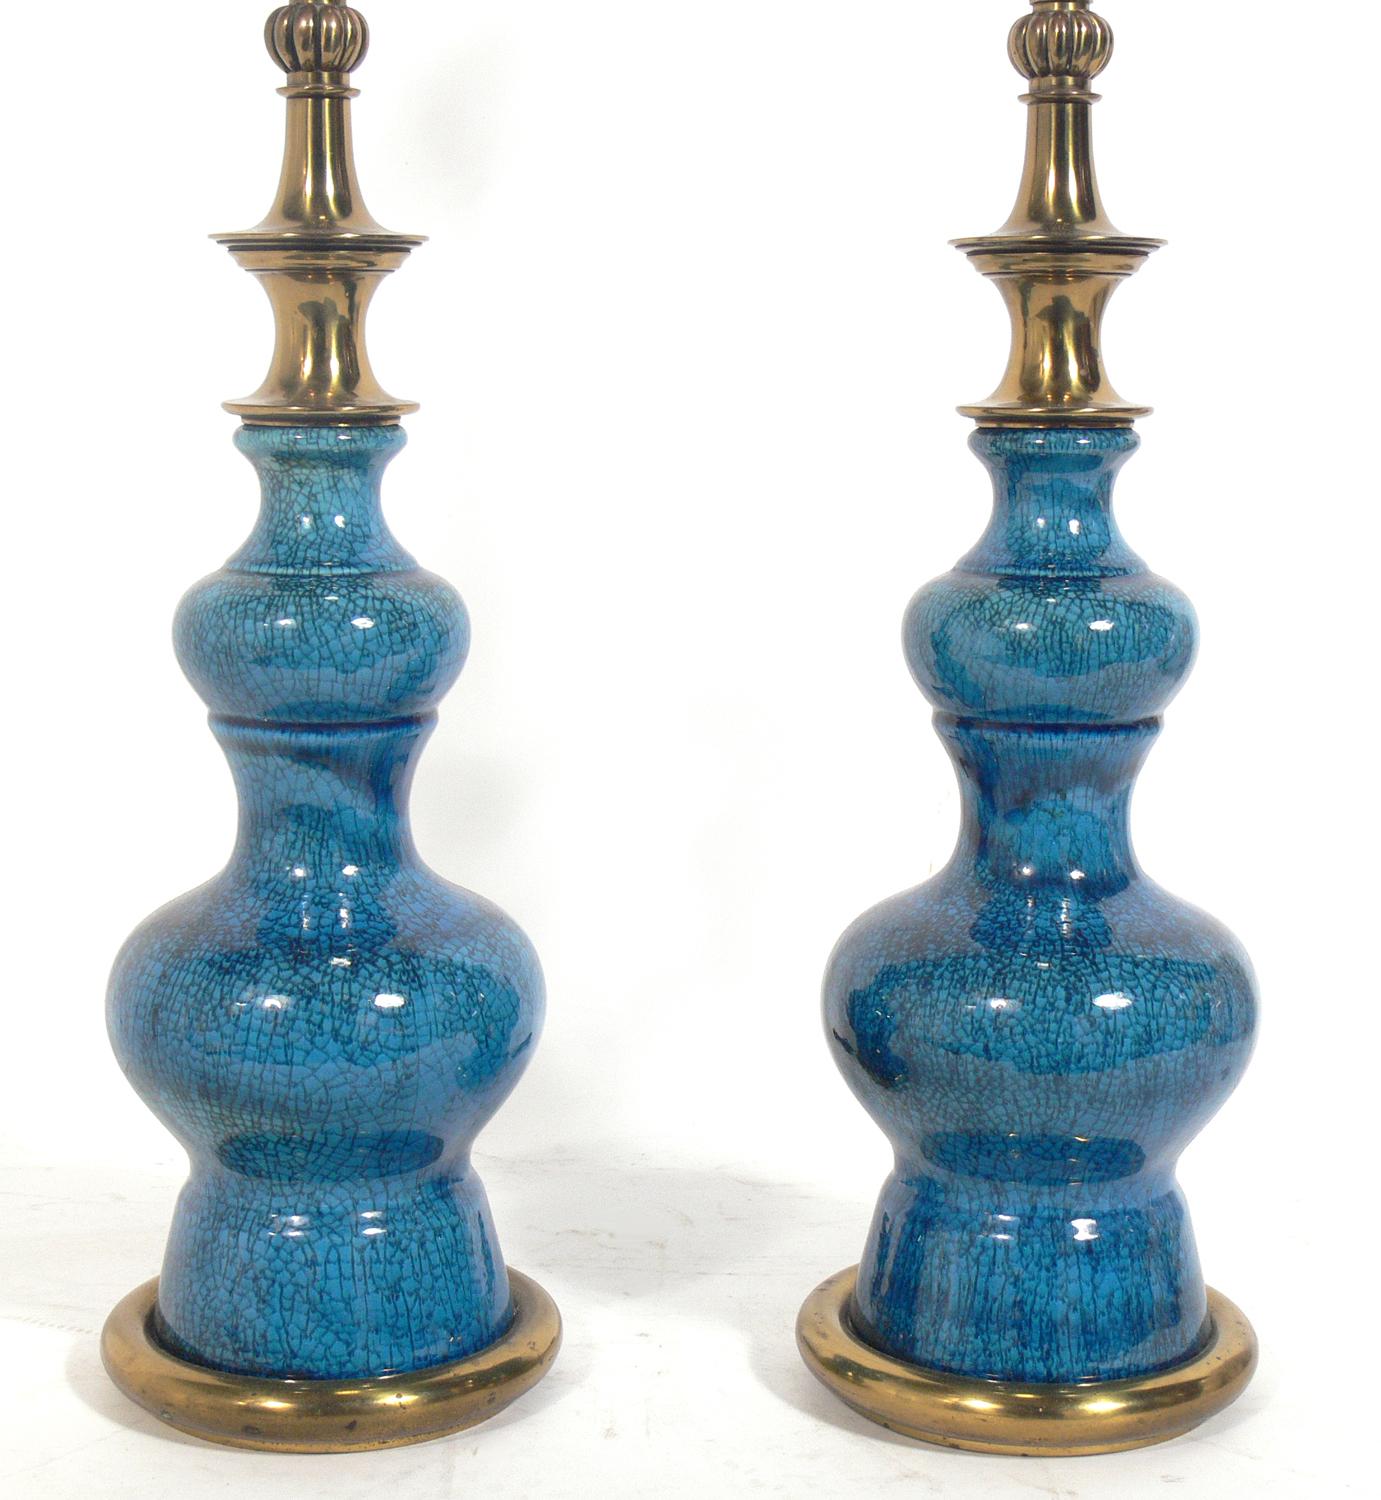 Pair of vibrant blue ceramic lamps, designed for Stiffel, circa 1950s. These lamps are executed in a vibrant blue color with a wonderful craquelure glaze. Nice heavyweight brass fittings with their original warm patina. The price noted in this